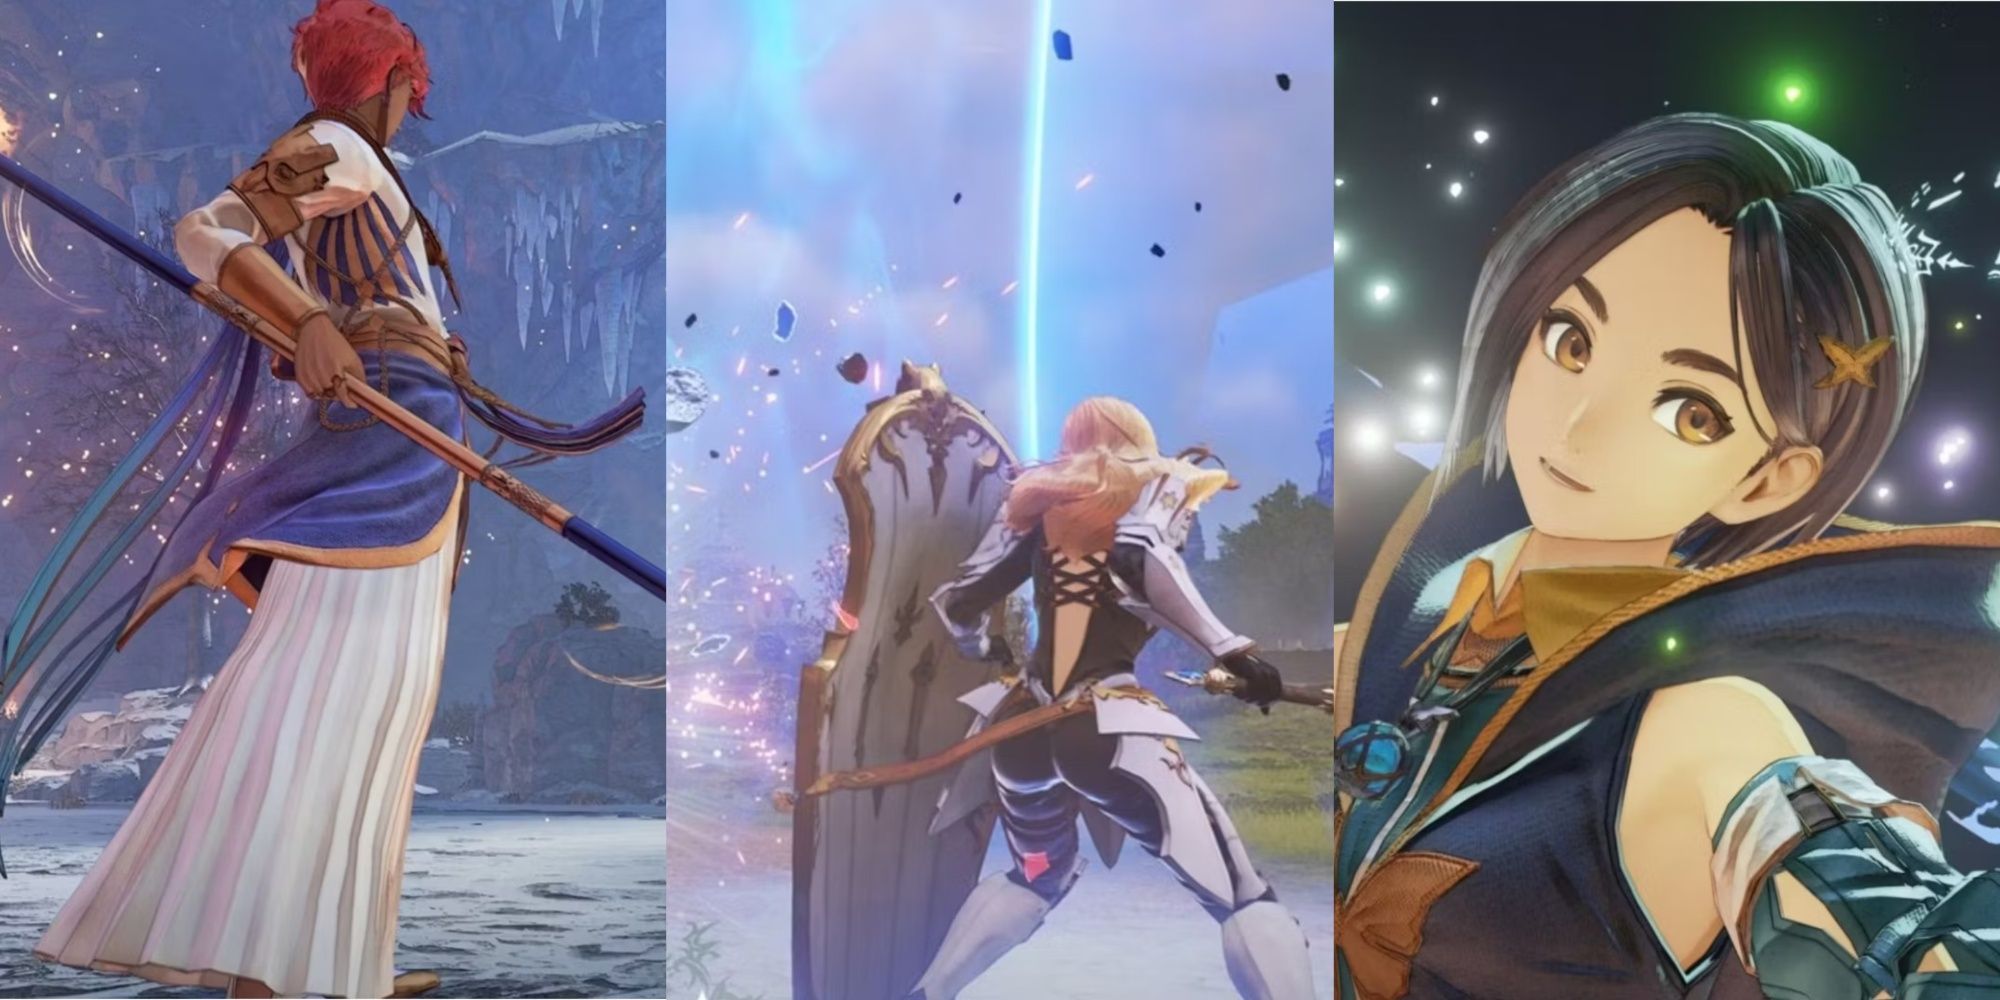 Tales of Arise three images showing main characters in the game